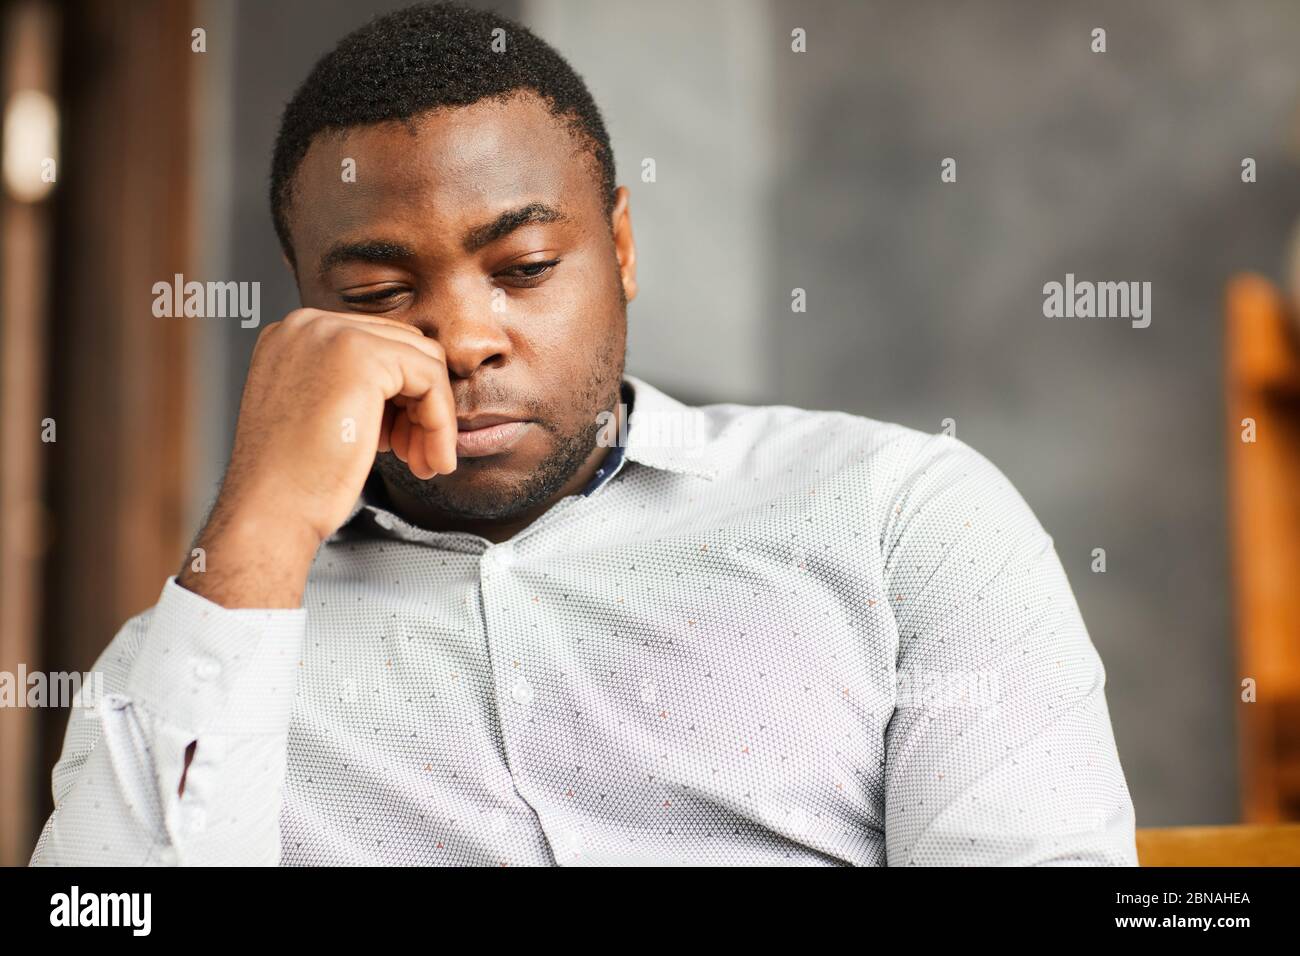 African young man sitting with sad look or thinking about something Stock Photo